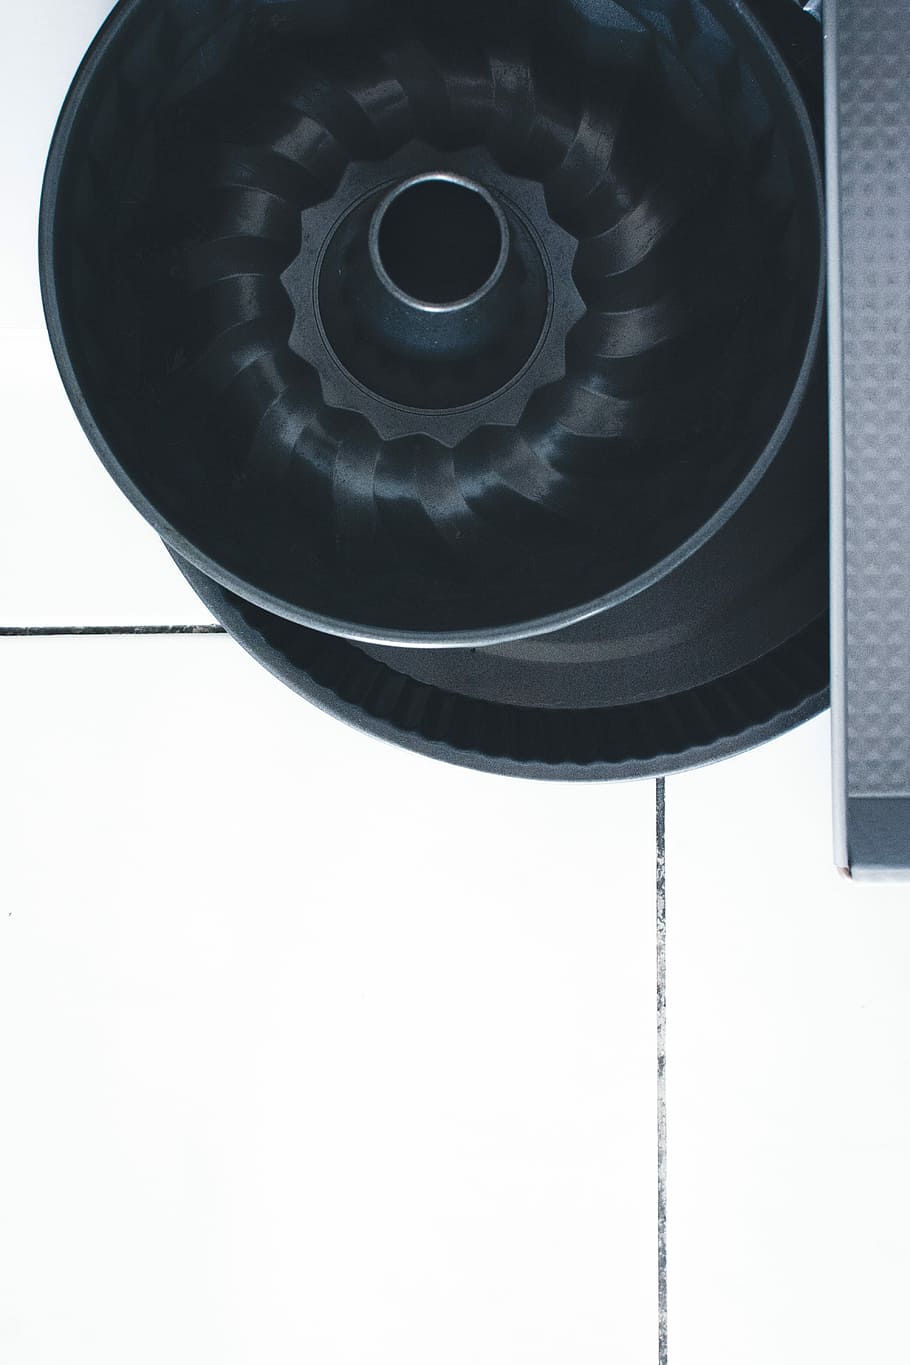 baking, Bundt pan, kitchenware, equipment, technology, day, close-up, outdoors, black color, metal